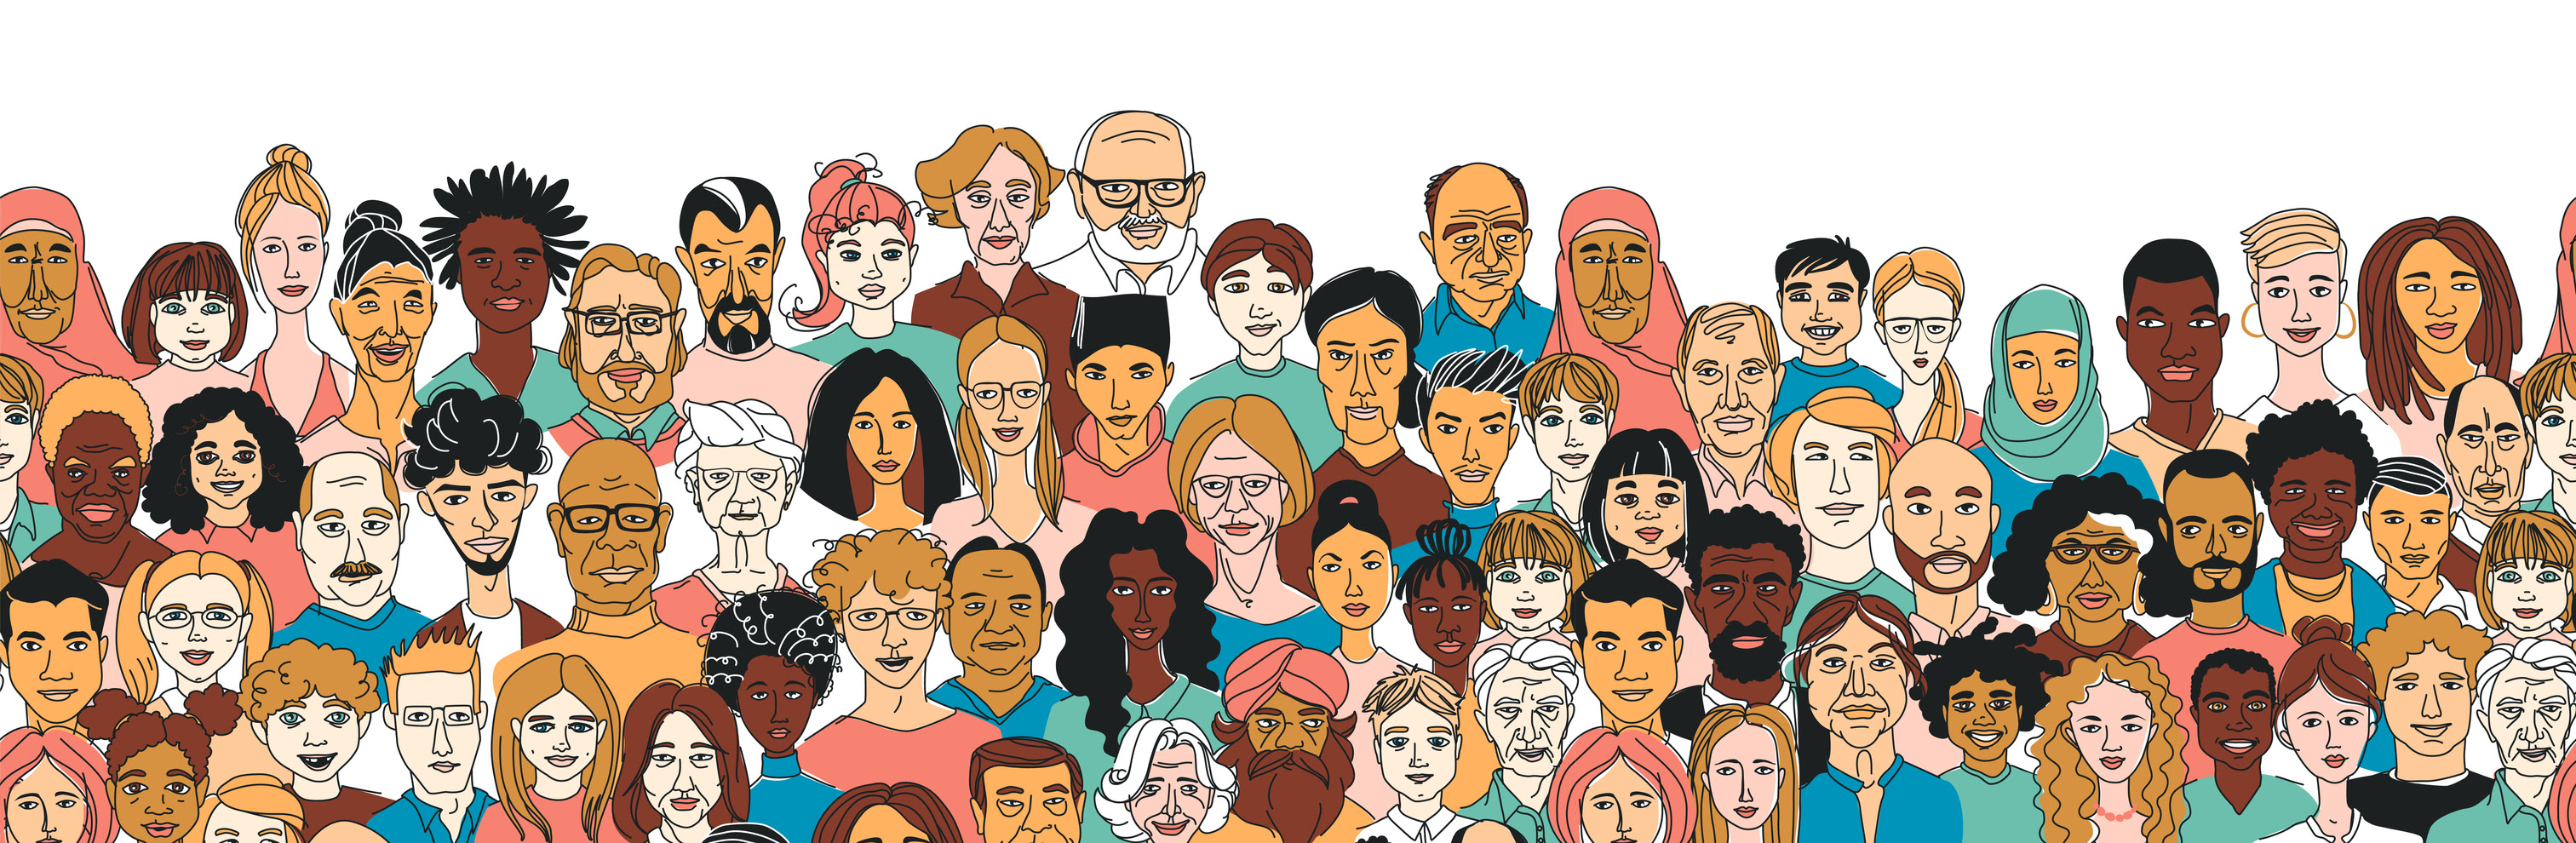 illustration of a large group of diverse people